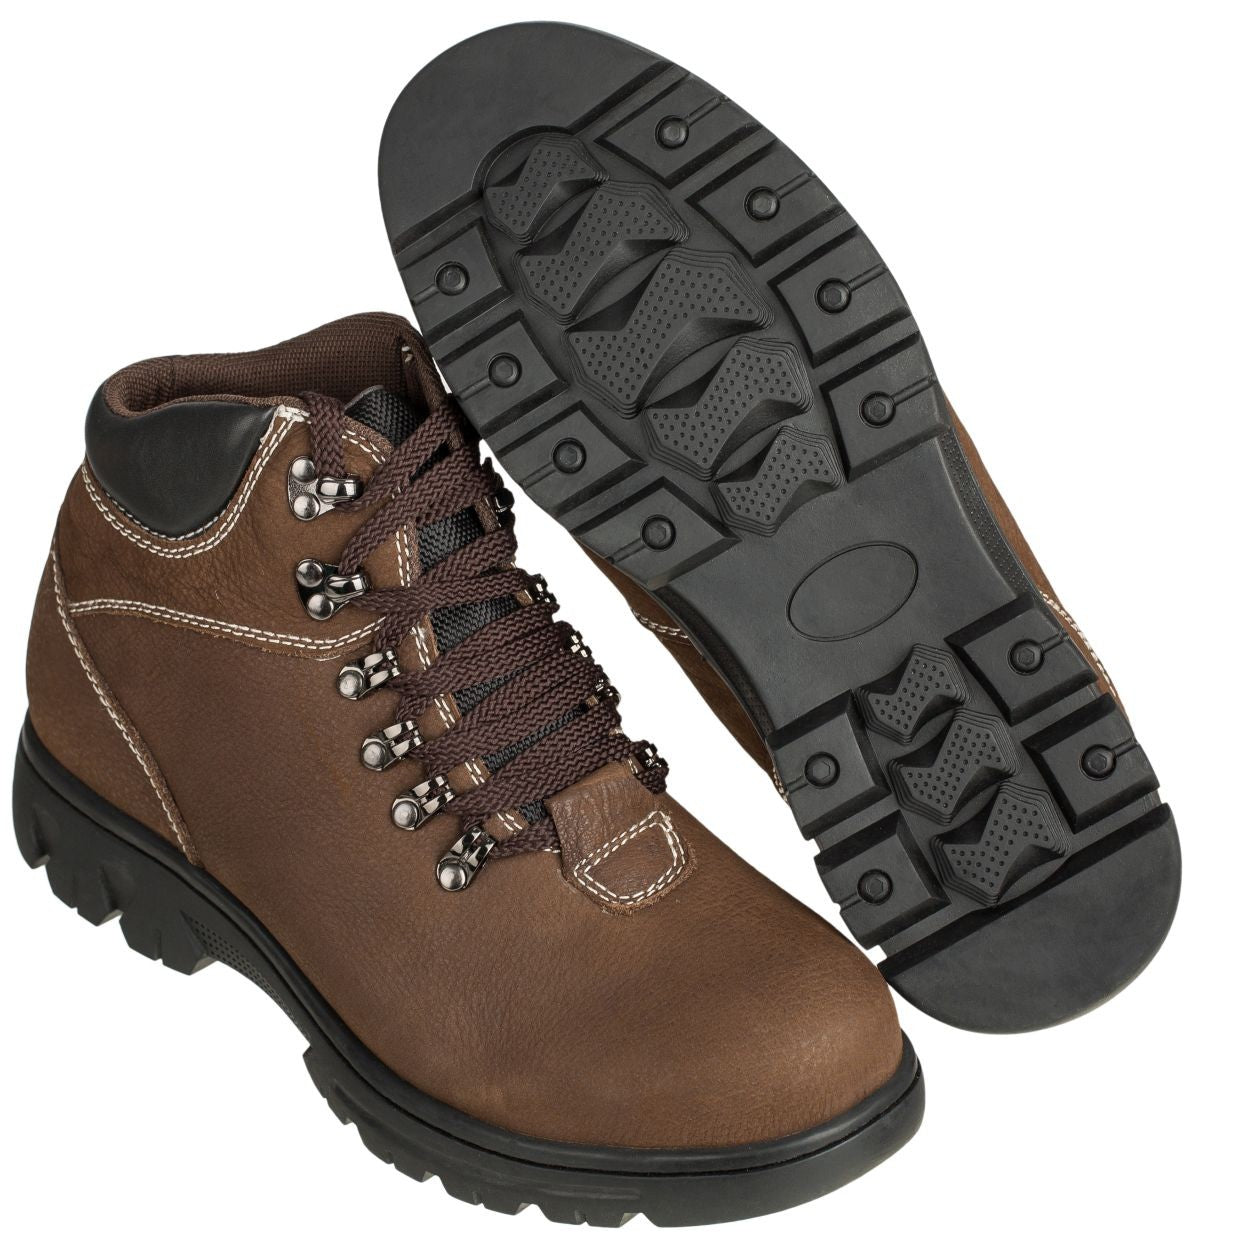 Elevator shoes height increase CALDEN Work-Style Elevator Boots (Nubuck Khaki Brown) - Three Inches - K228112